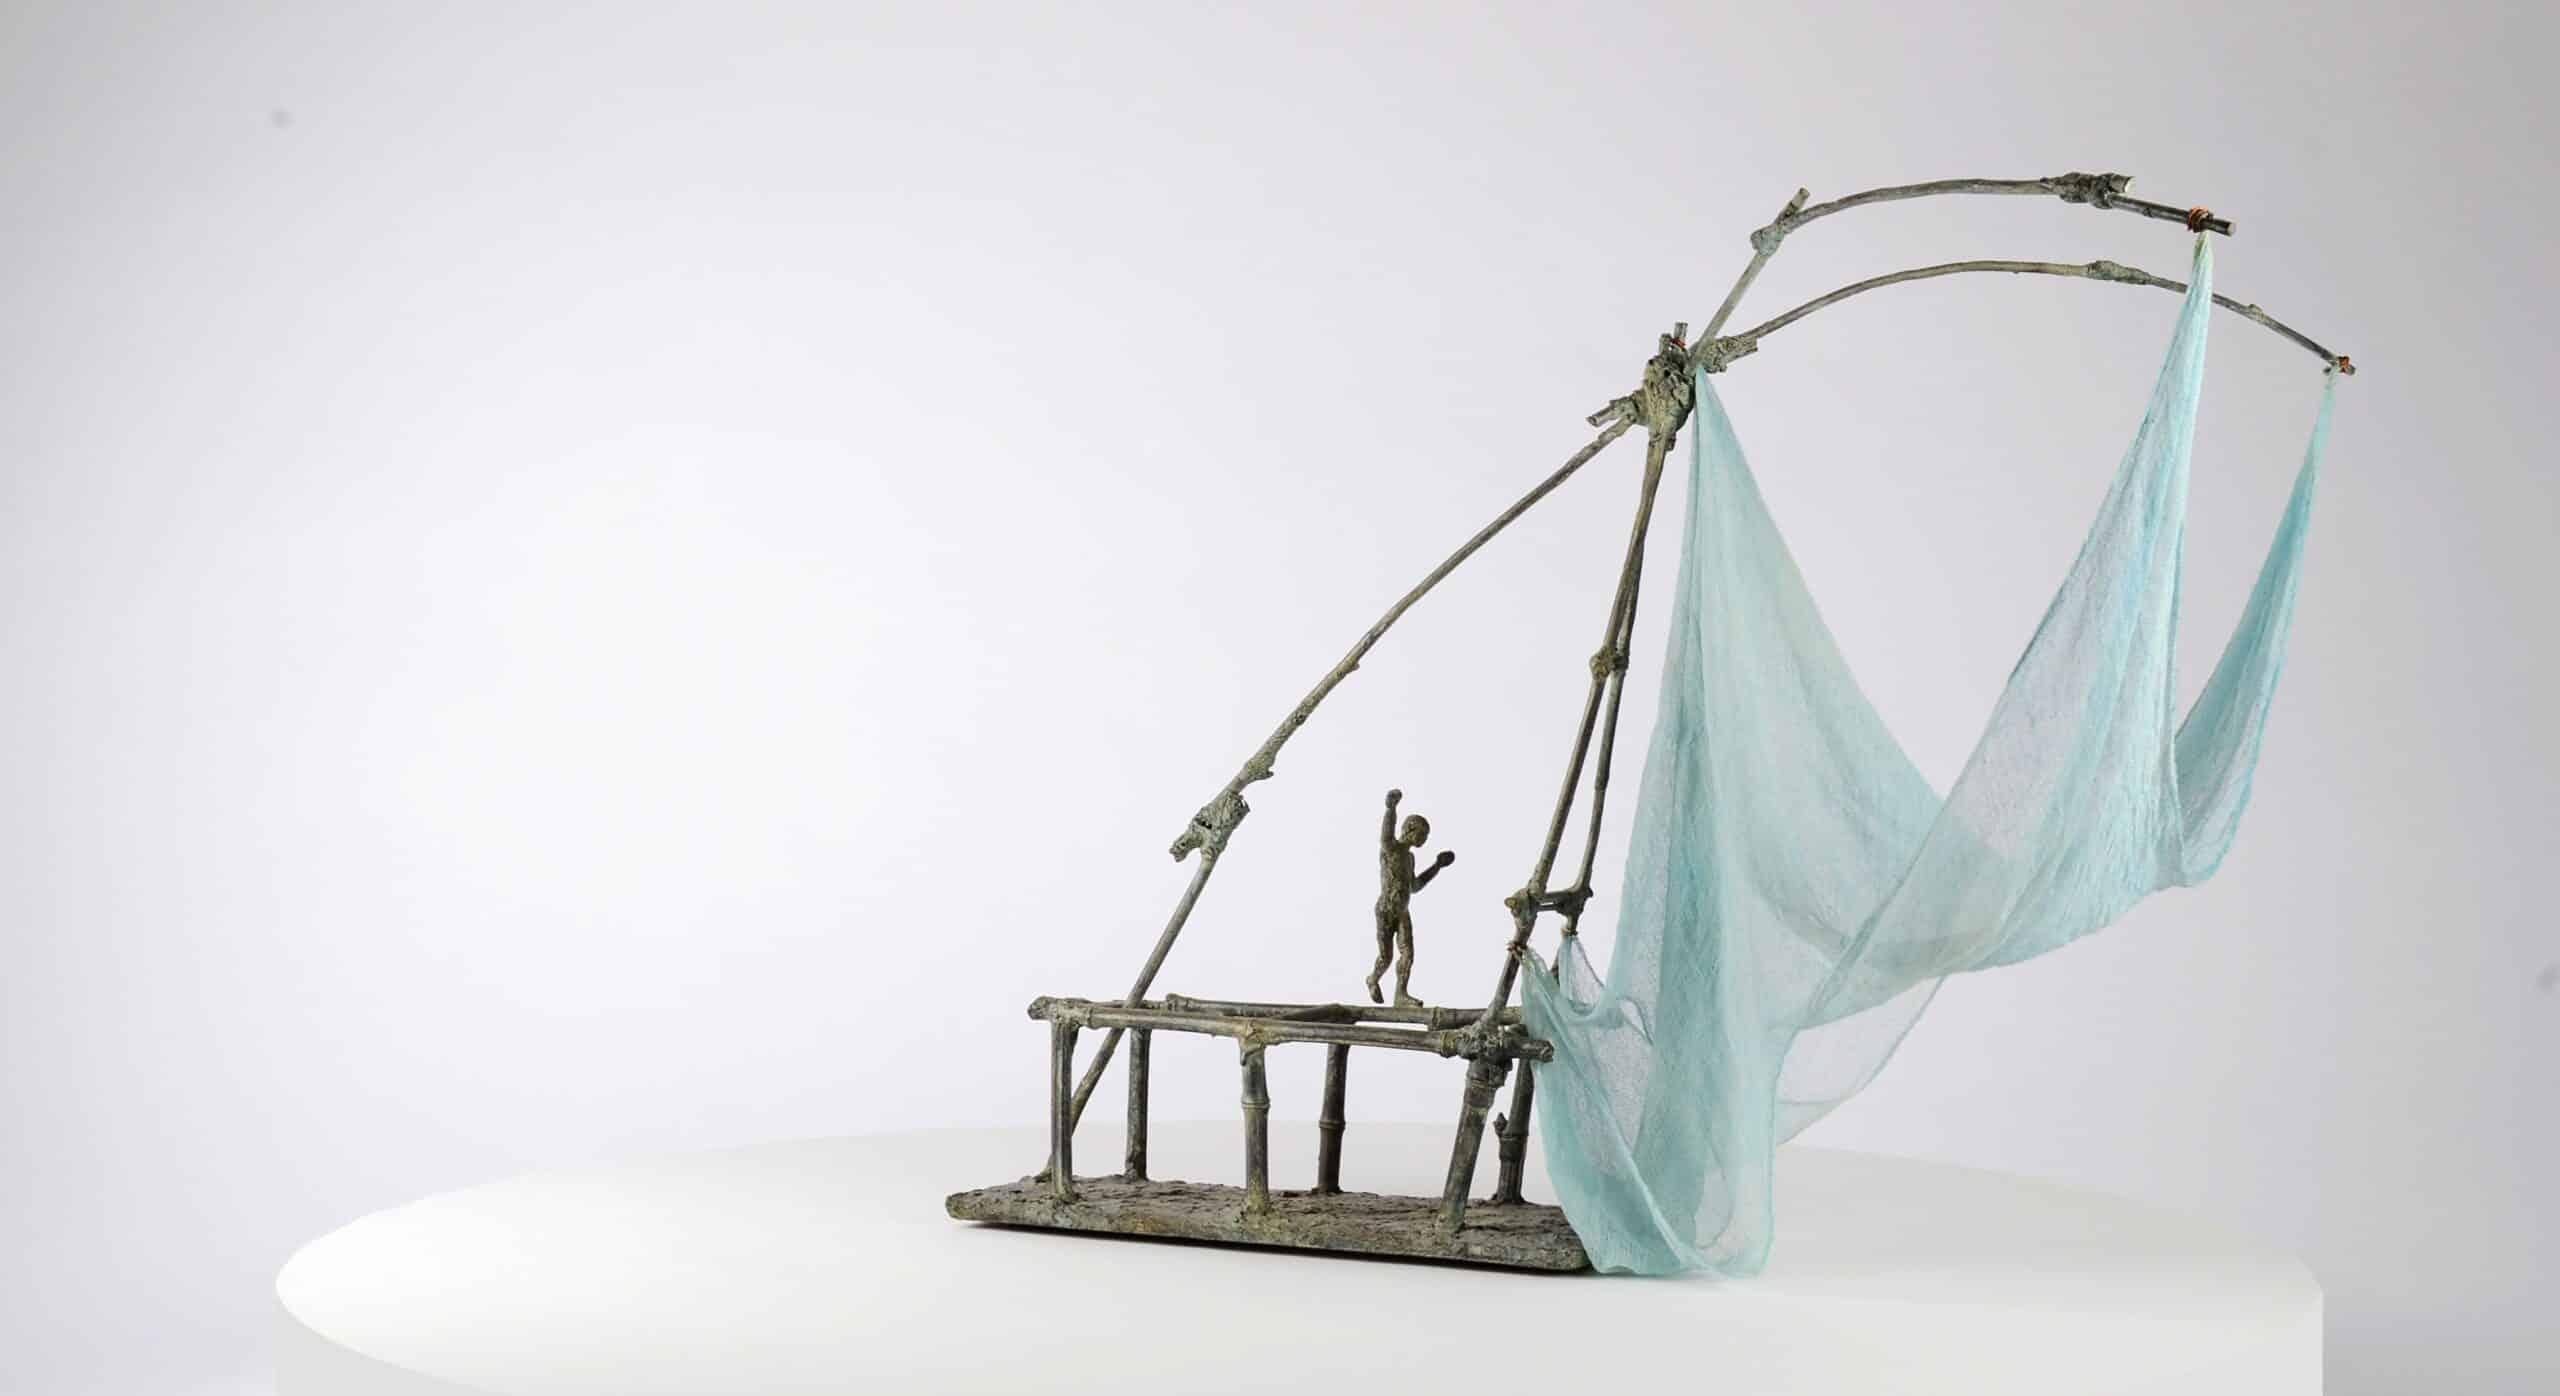 The Fisherman’s Hammock is a bronze sculpture by French contemporary artist Marine de Soos, dimensions are 53 × 61 × 58 cm (20.9 × 24 × 22.8 in). 
The sculpture is signed and numbered, it is part of a limited edition of 8 editions + 4 artist’s